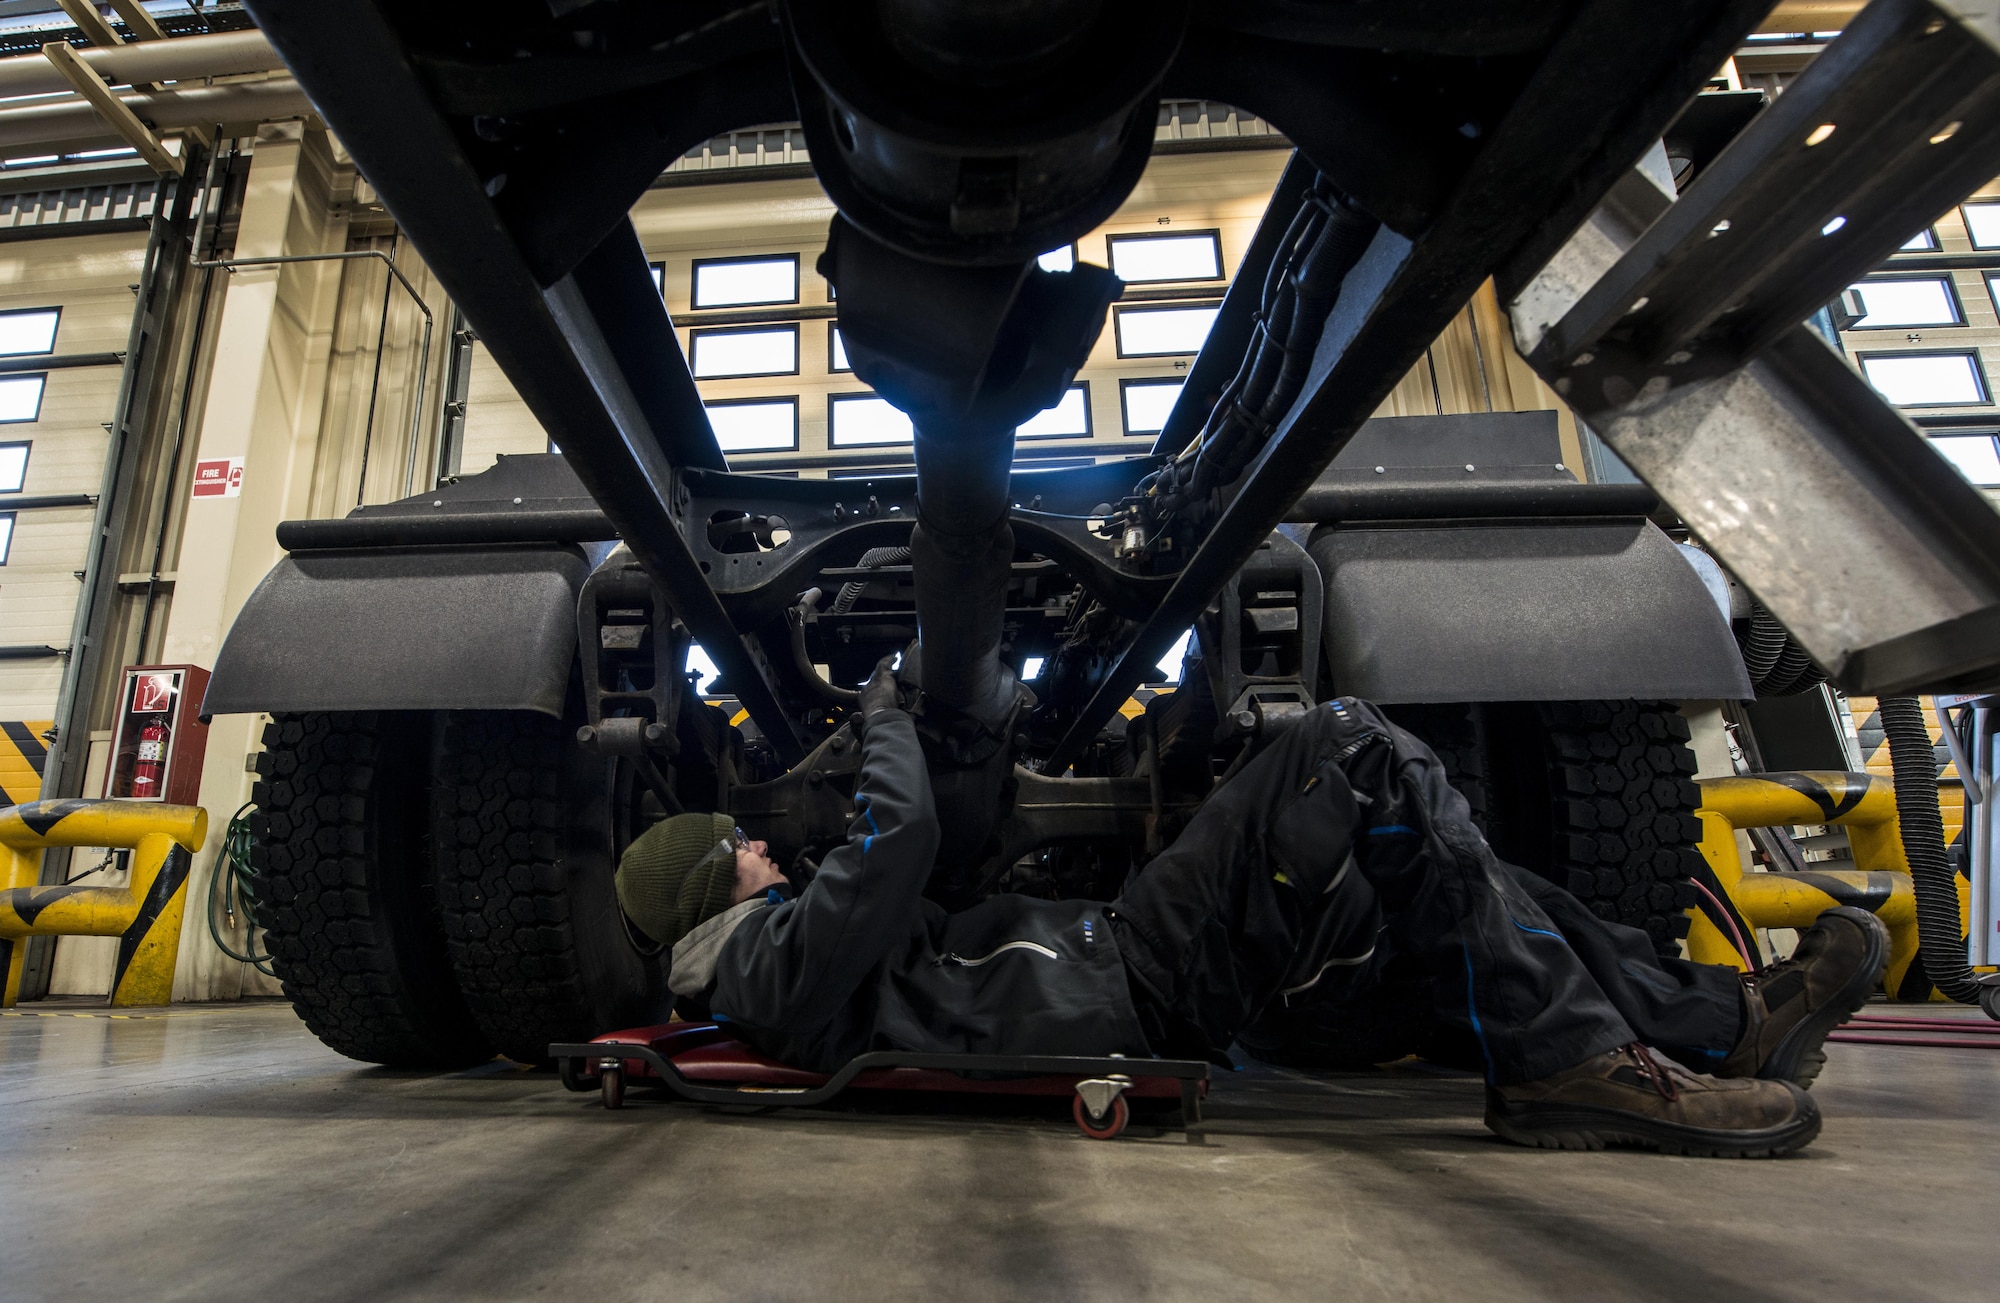 Hendrik Ecker, 86th Vehicle Readiness Squadron vehicle mechanic technician, works on the axle of a tractor trailer vehicle at Ramstein Air Base, Germany, Nov. 14, 2016. Ecker applied for Ramstein’s Local National Apprenticeship program and was provided a position in the 86th VRS to study vehicle maintenance. Twenty other local nationals were chosen for the program, and Ramstein hopes to further the partnership it has fostered with the local community. (U.S. Air Force photo by Senior Airman Tryphena Mayhugh)